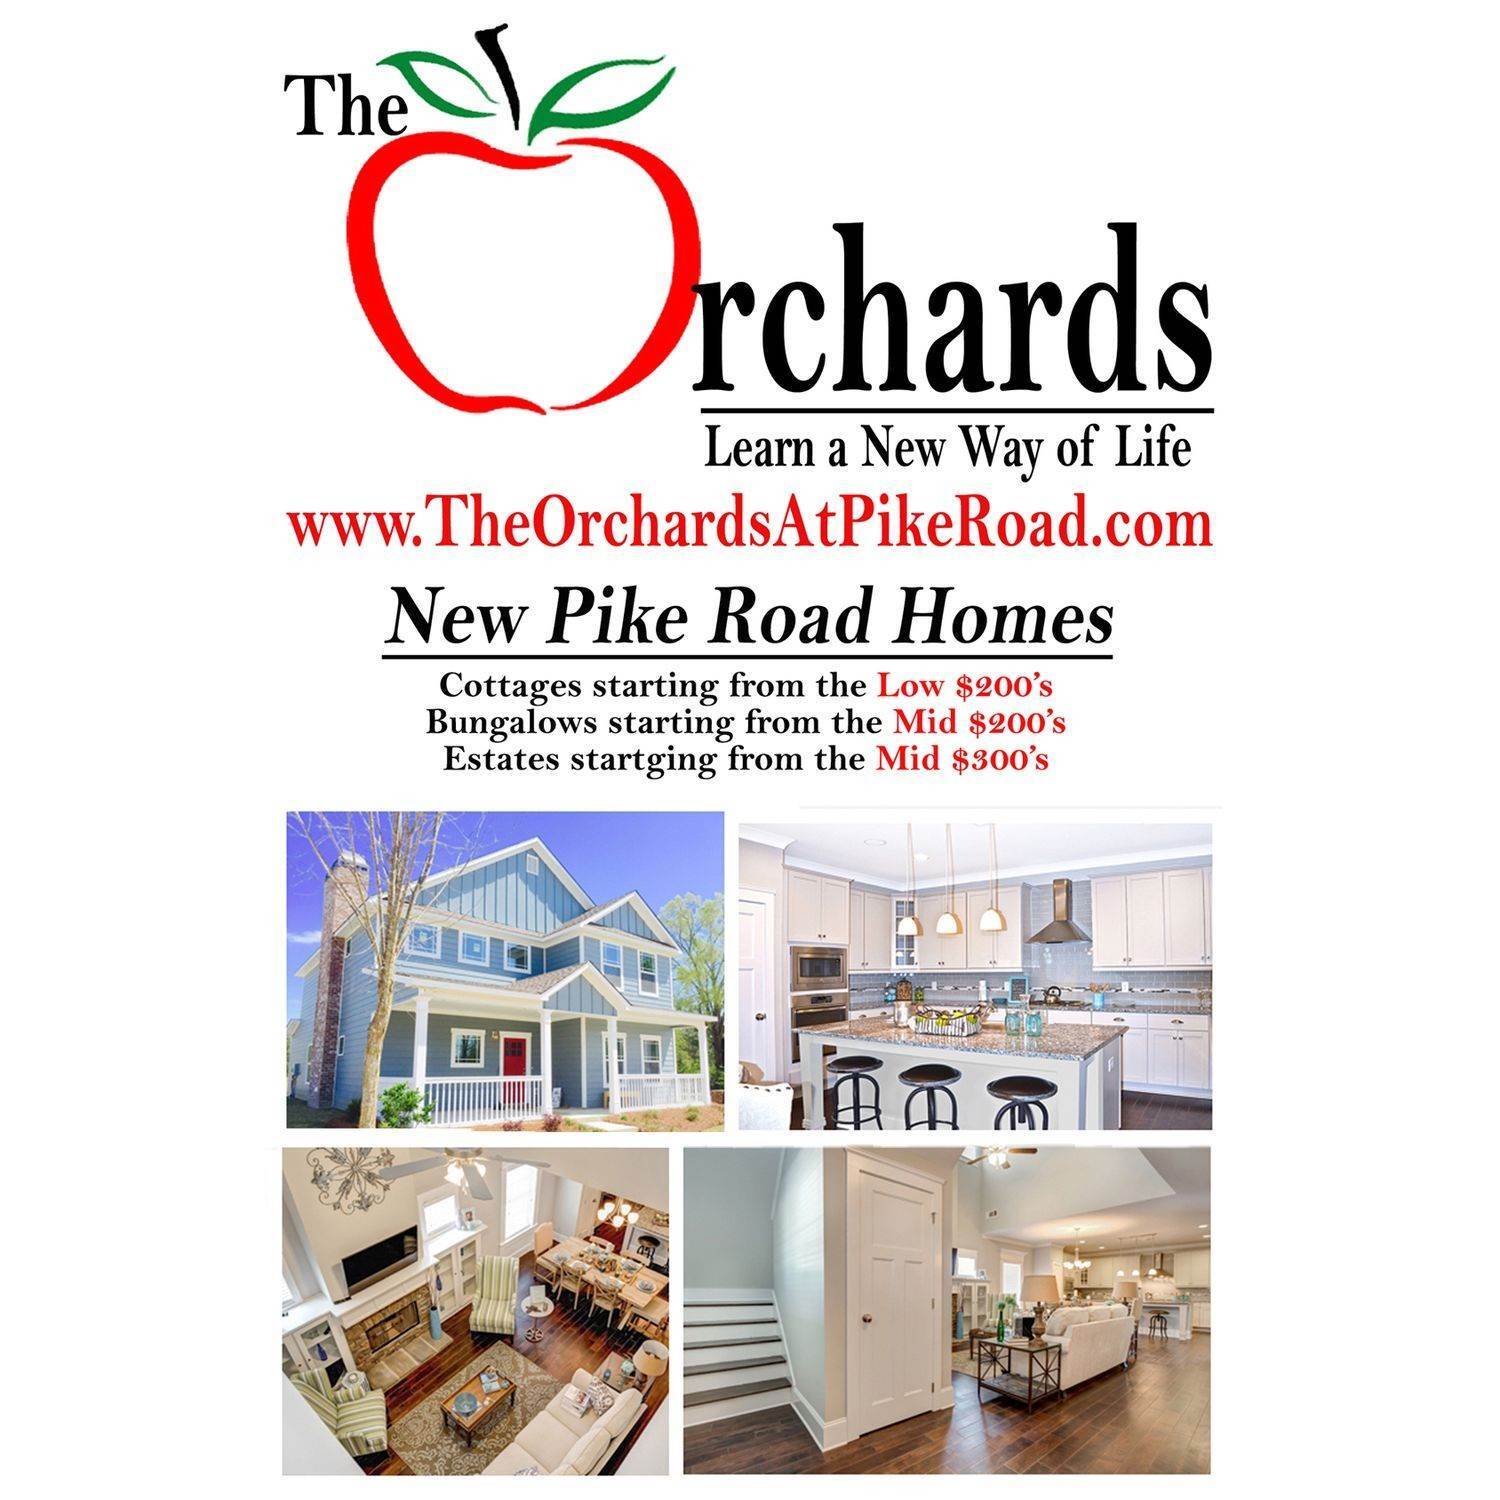 3. The Orchards at Pike Road building at 130 Avenue Of Learning, Pike Road, AL 36064